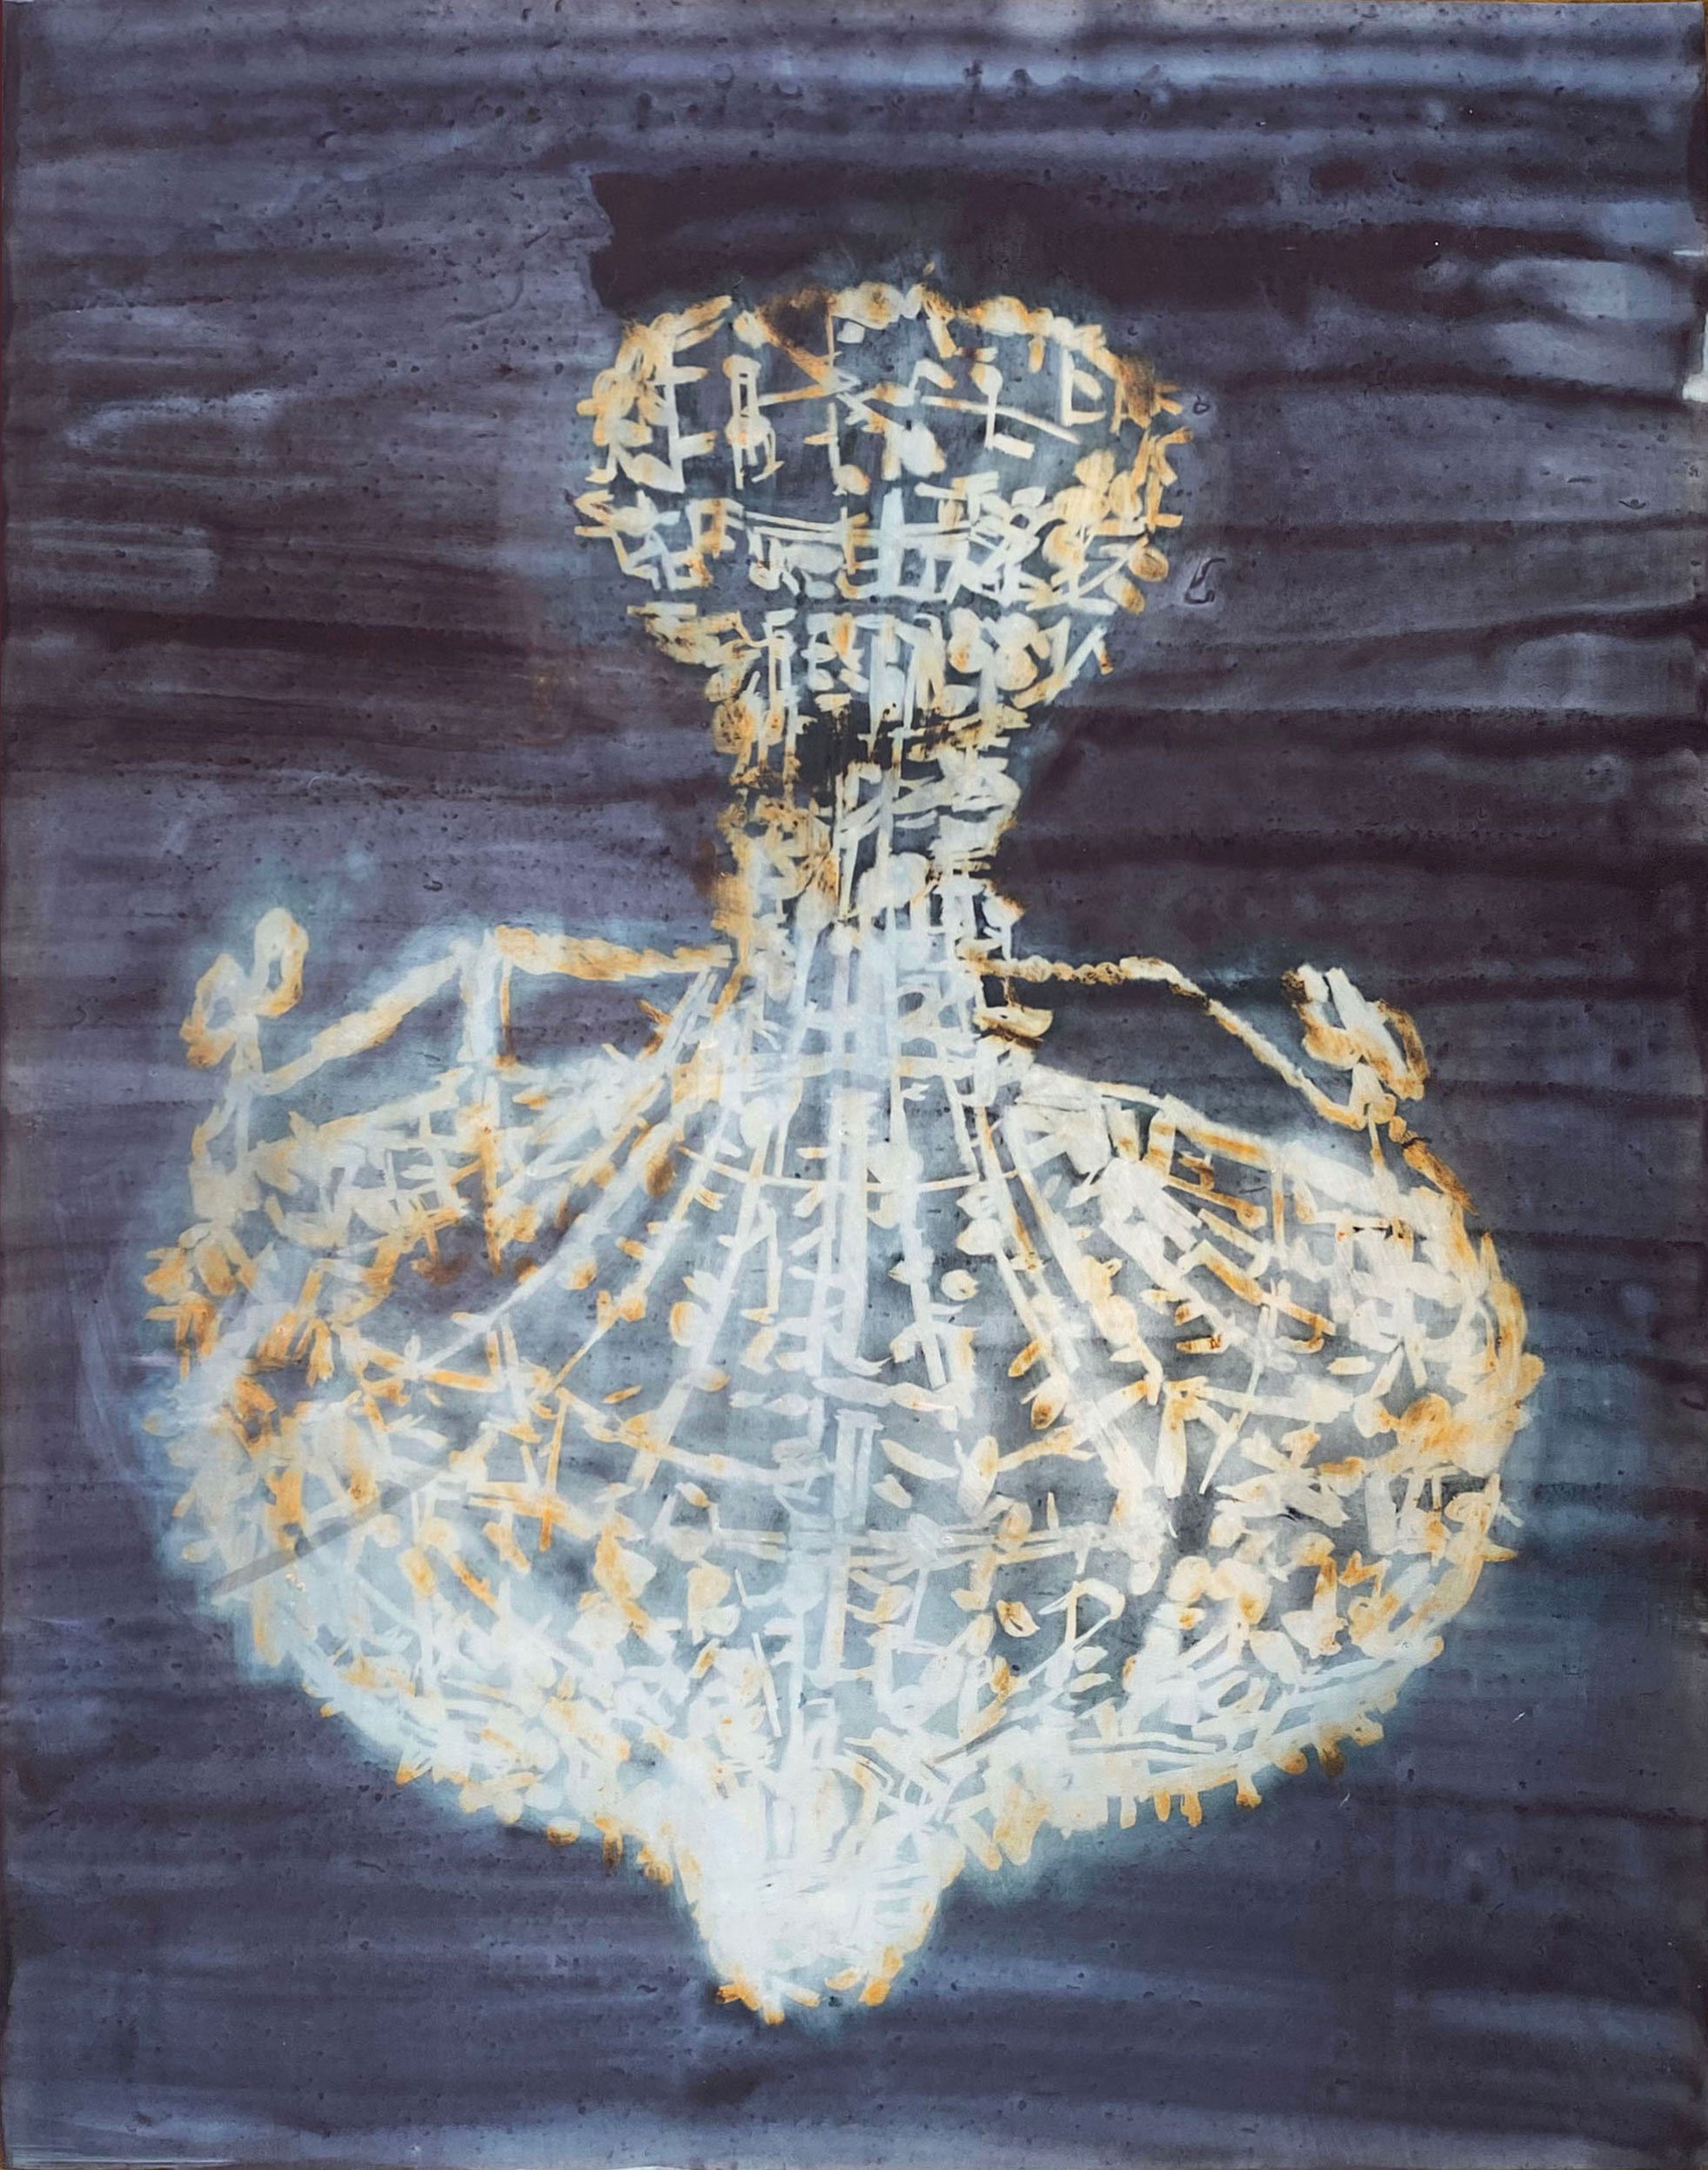   Chandelier  2023, Wax and acrylic on polyester film 26.8 x 20.9 cm 